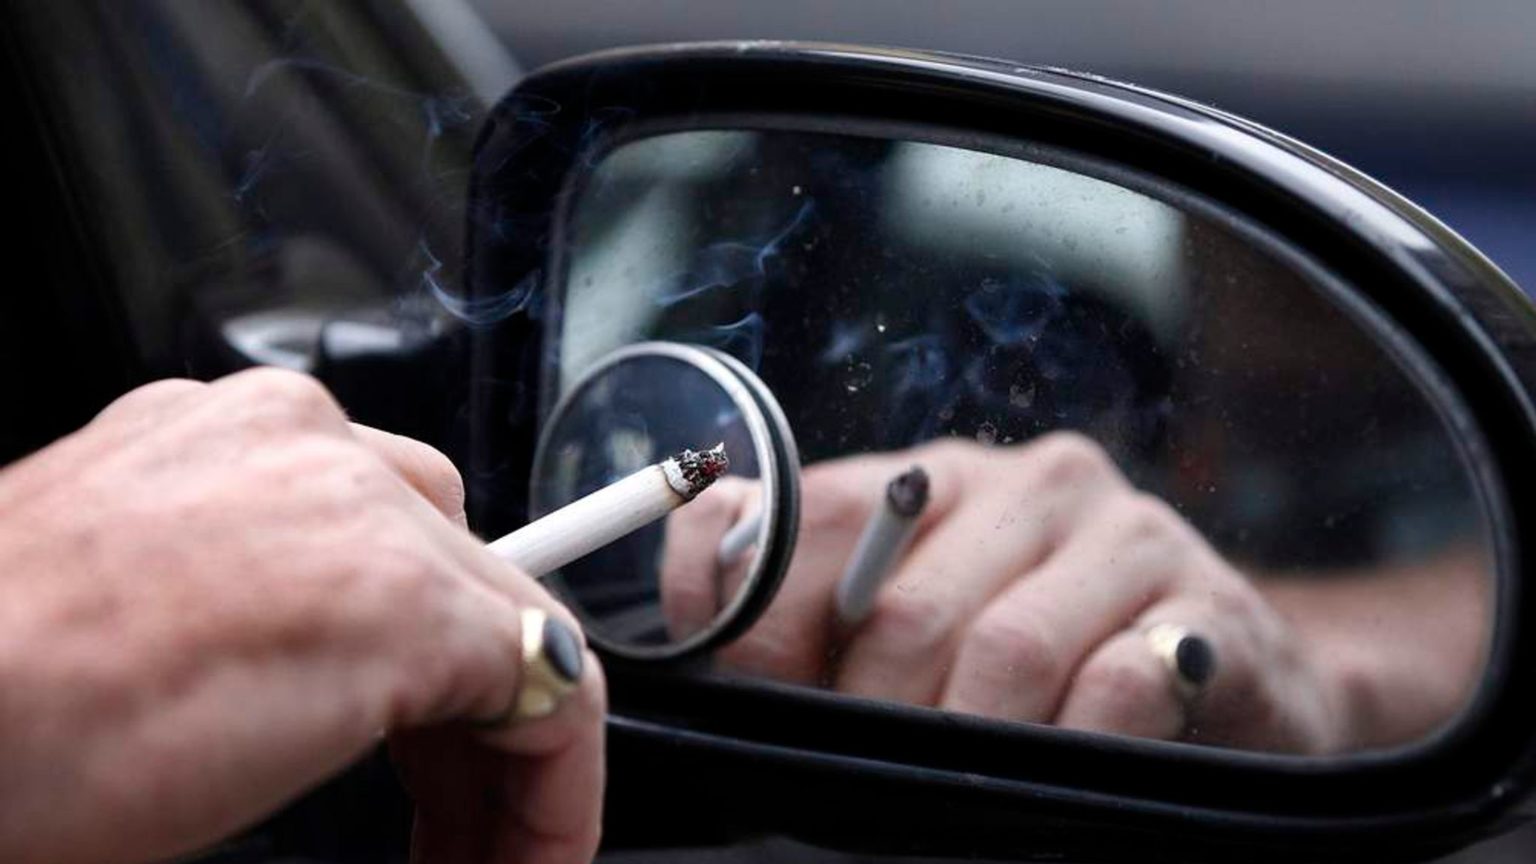 How To Remove Smoke And Cigarette Smells From A Car